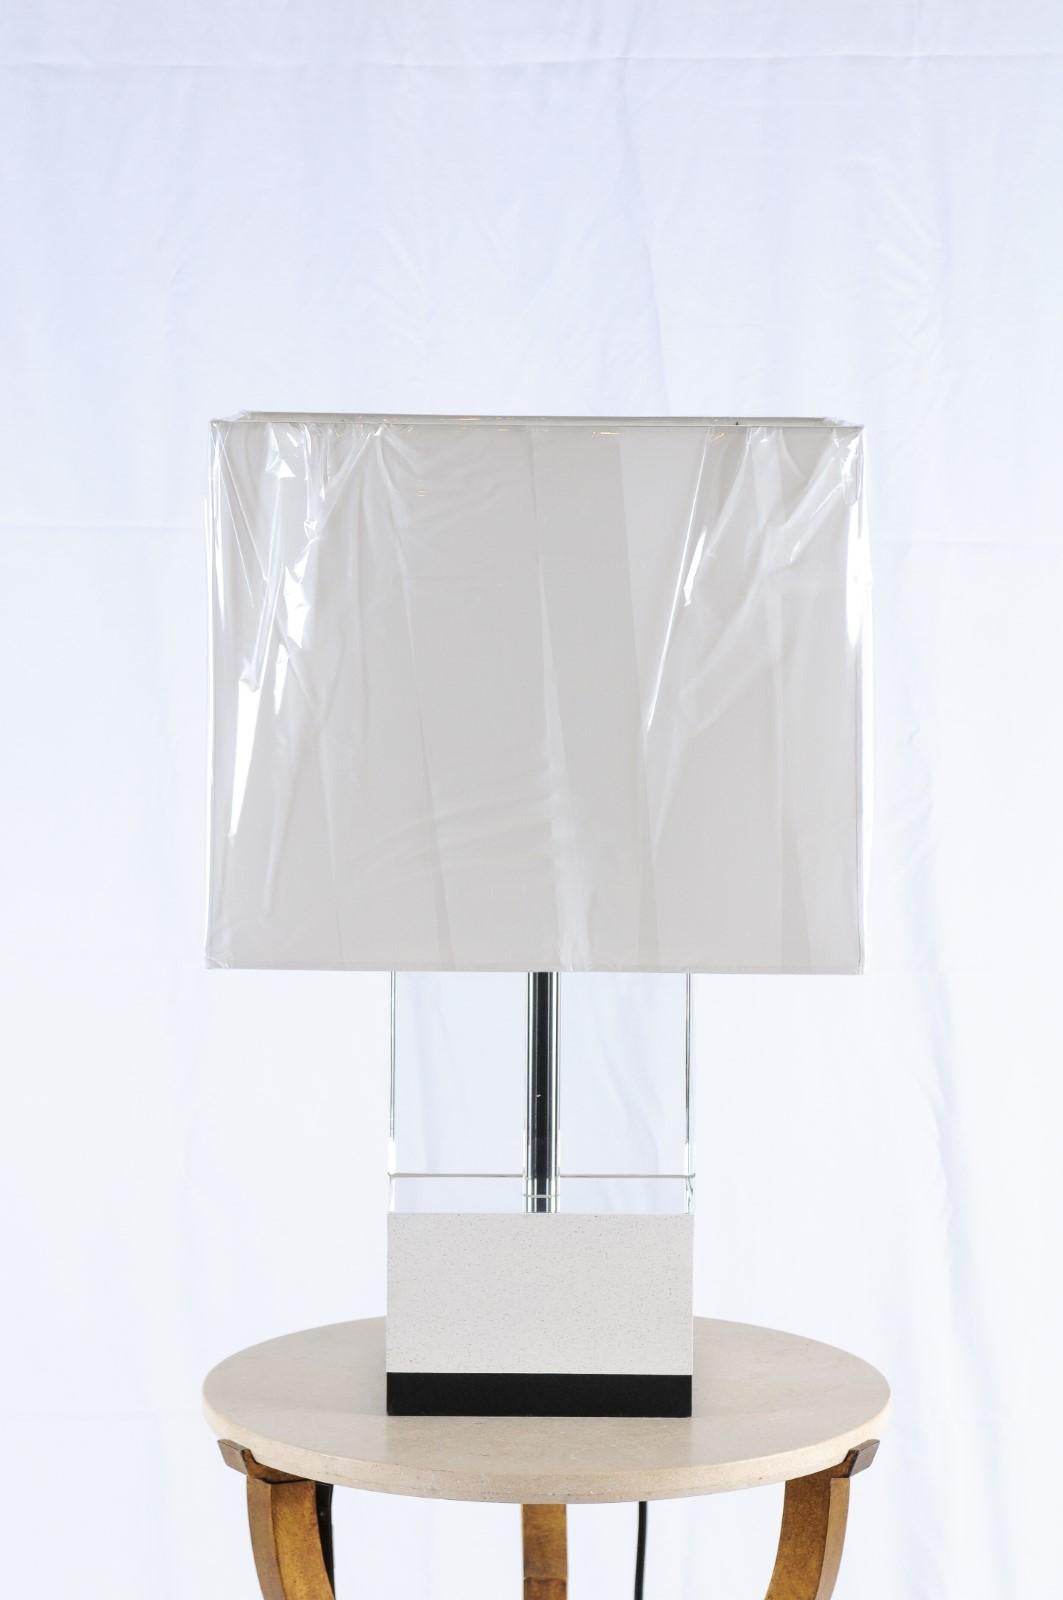 Lasting in it's simplicity, the Baker Glacier table lamp is a mixes glass, plaster and steel in a contemporary rectangle that's sleek and sophisticated for any interior.